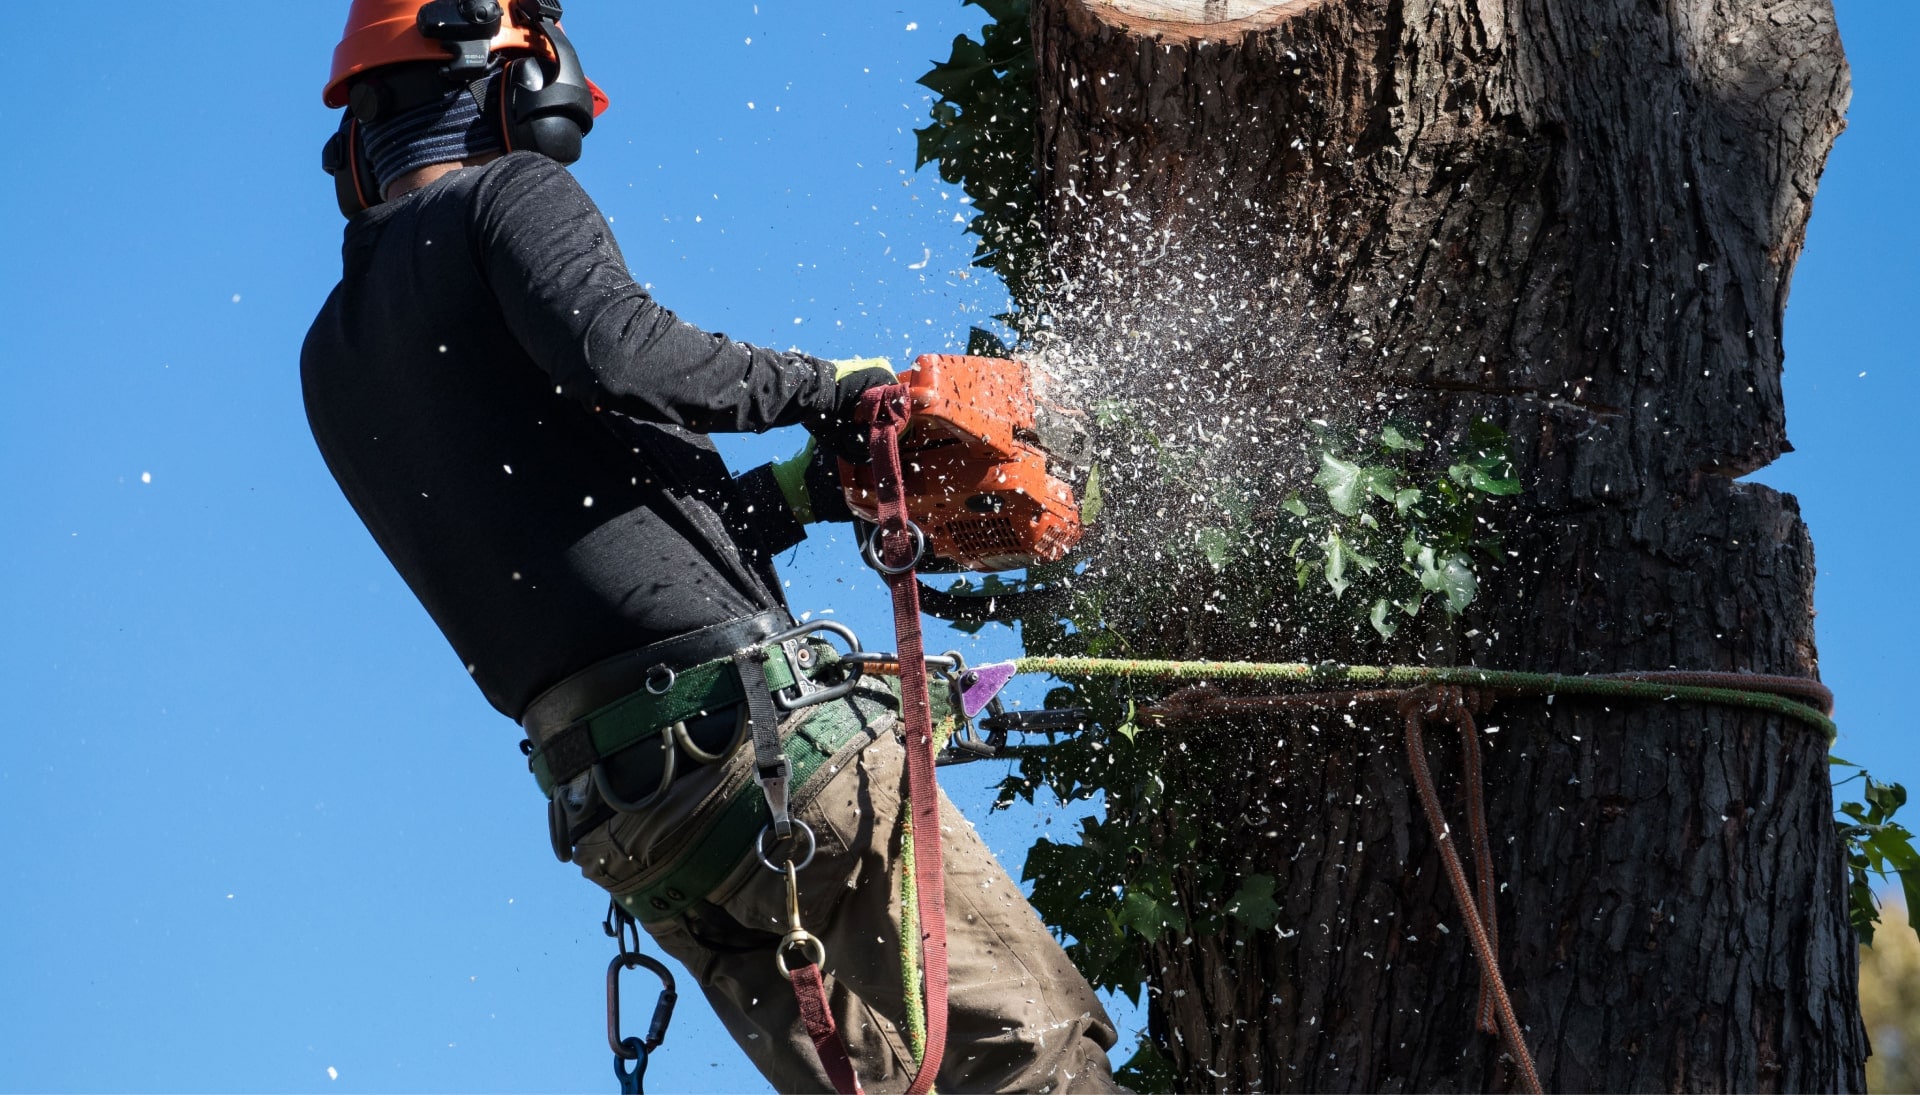 Tree removal solutions expert is using safety rope to keep balance in Birmingham, Alabama